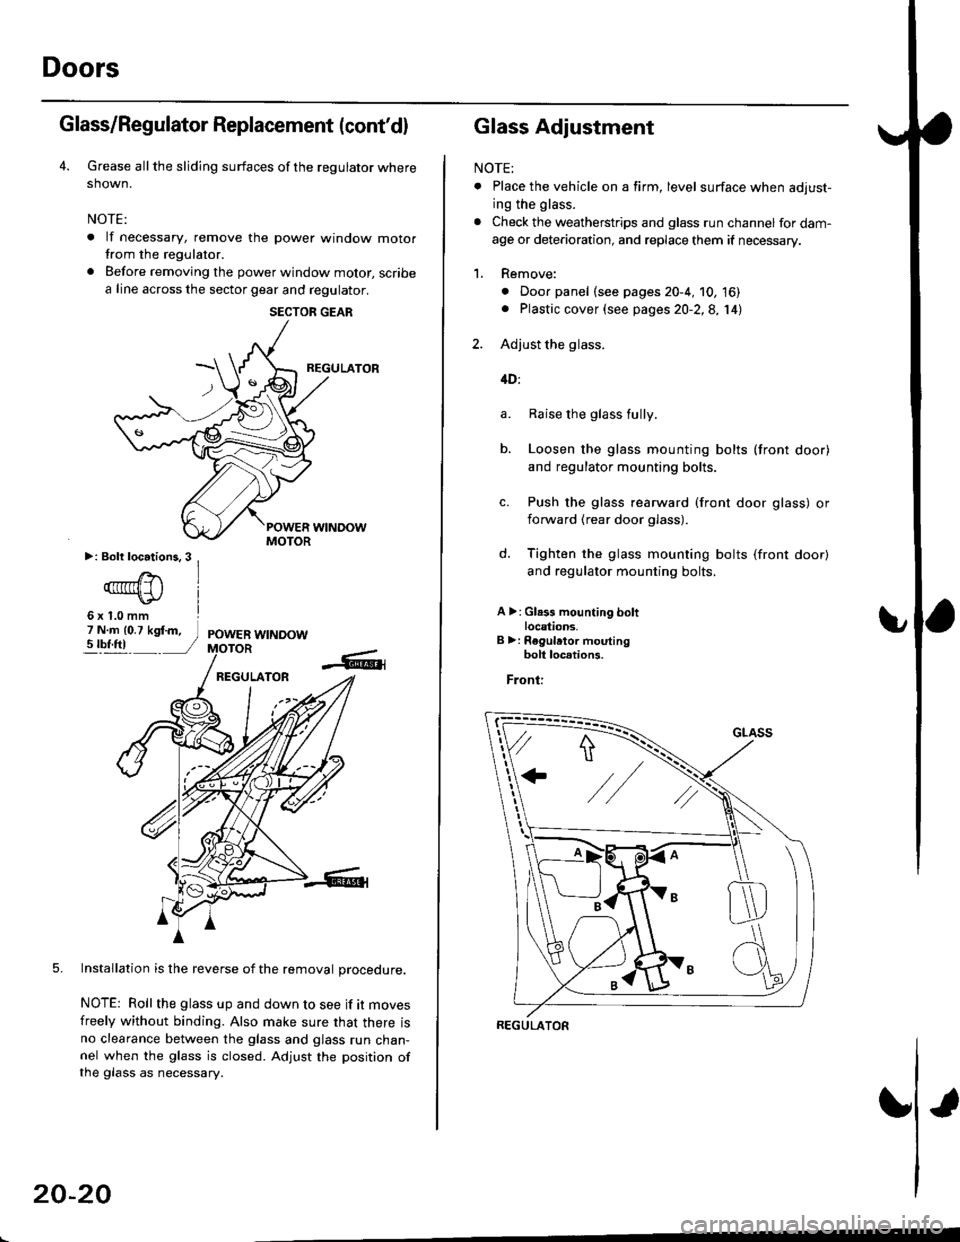 HONDA CIVIC 2000 6.G Workshop Manual Doors
Glass/Regulator Replacement (contdl
Grease all the sliding surfaces of the regulator where
shown.
NOTE:
. lf necessary, remove the power window motorfrom the regulator.
. Before removing the po